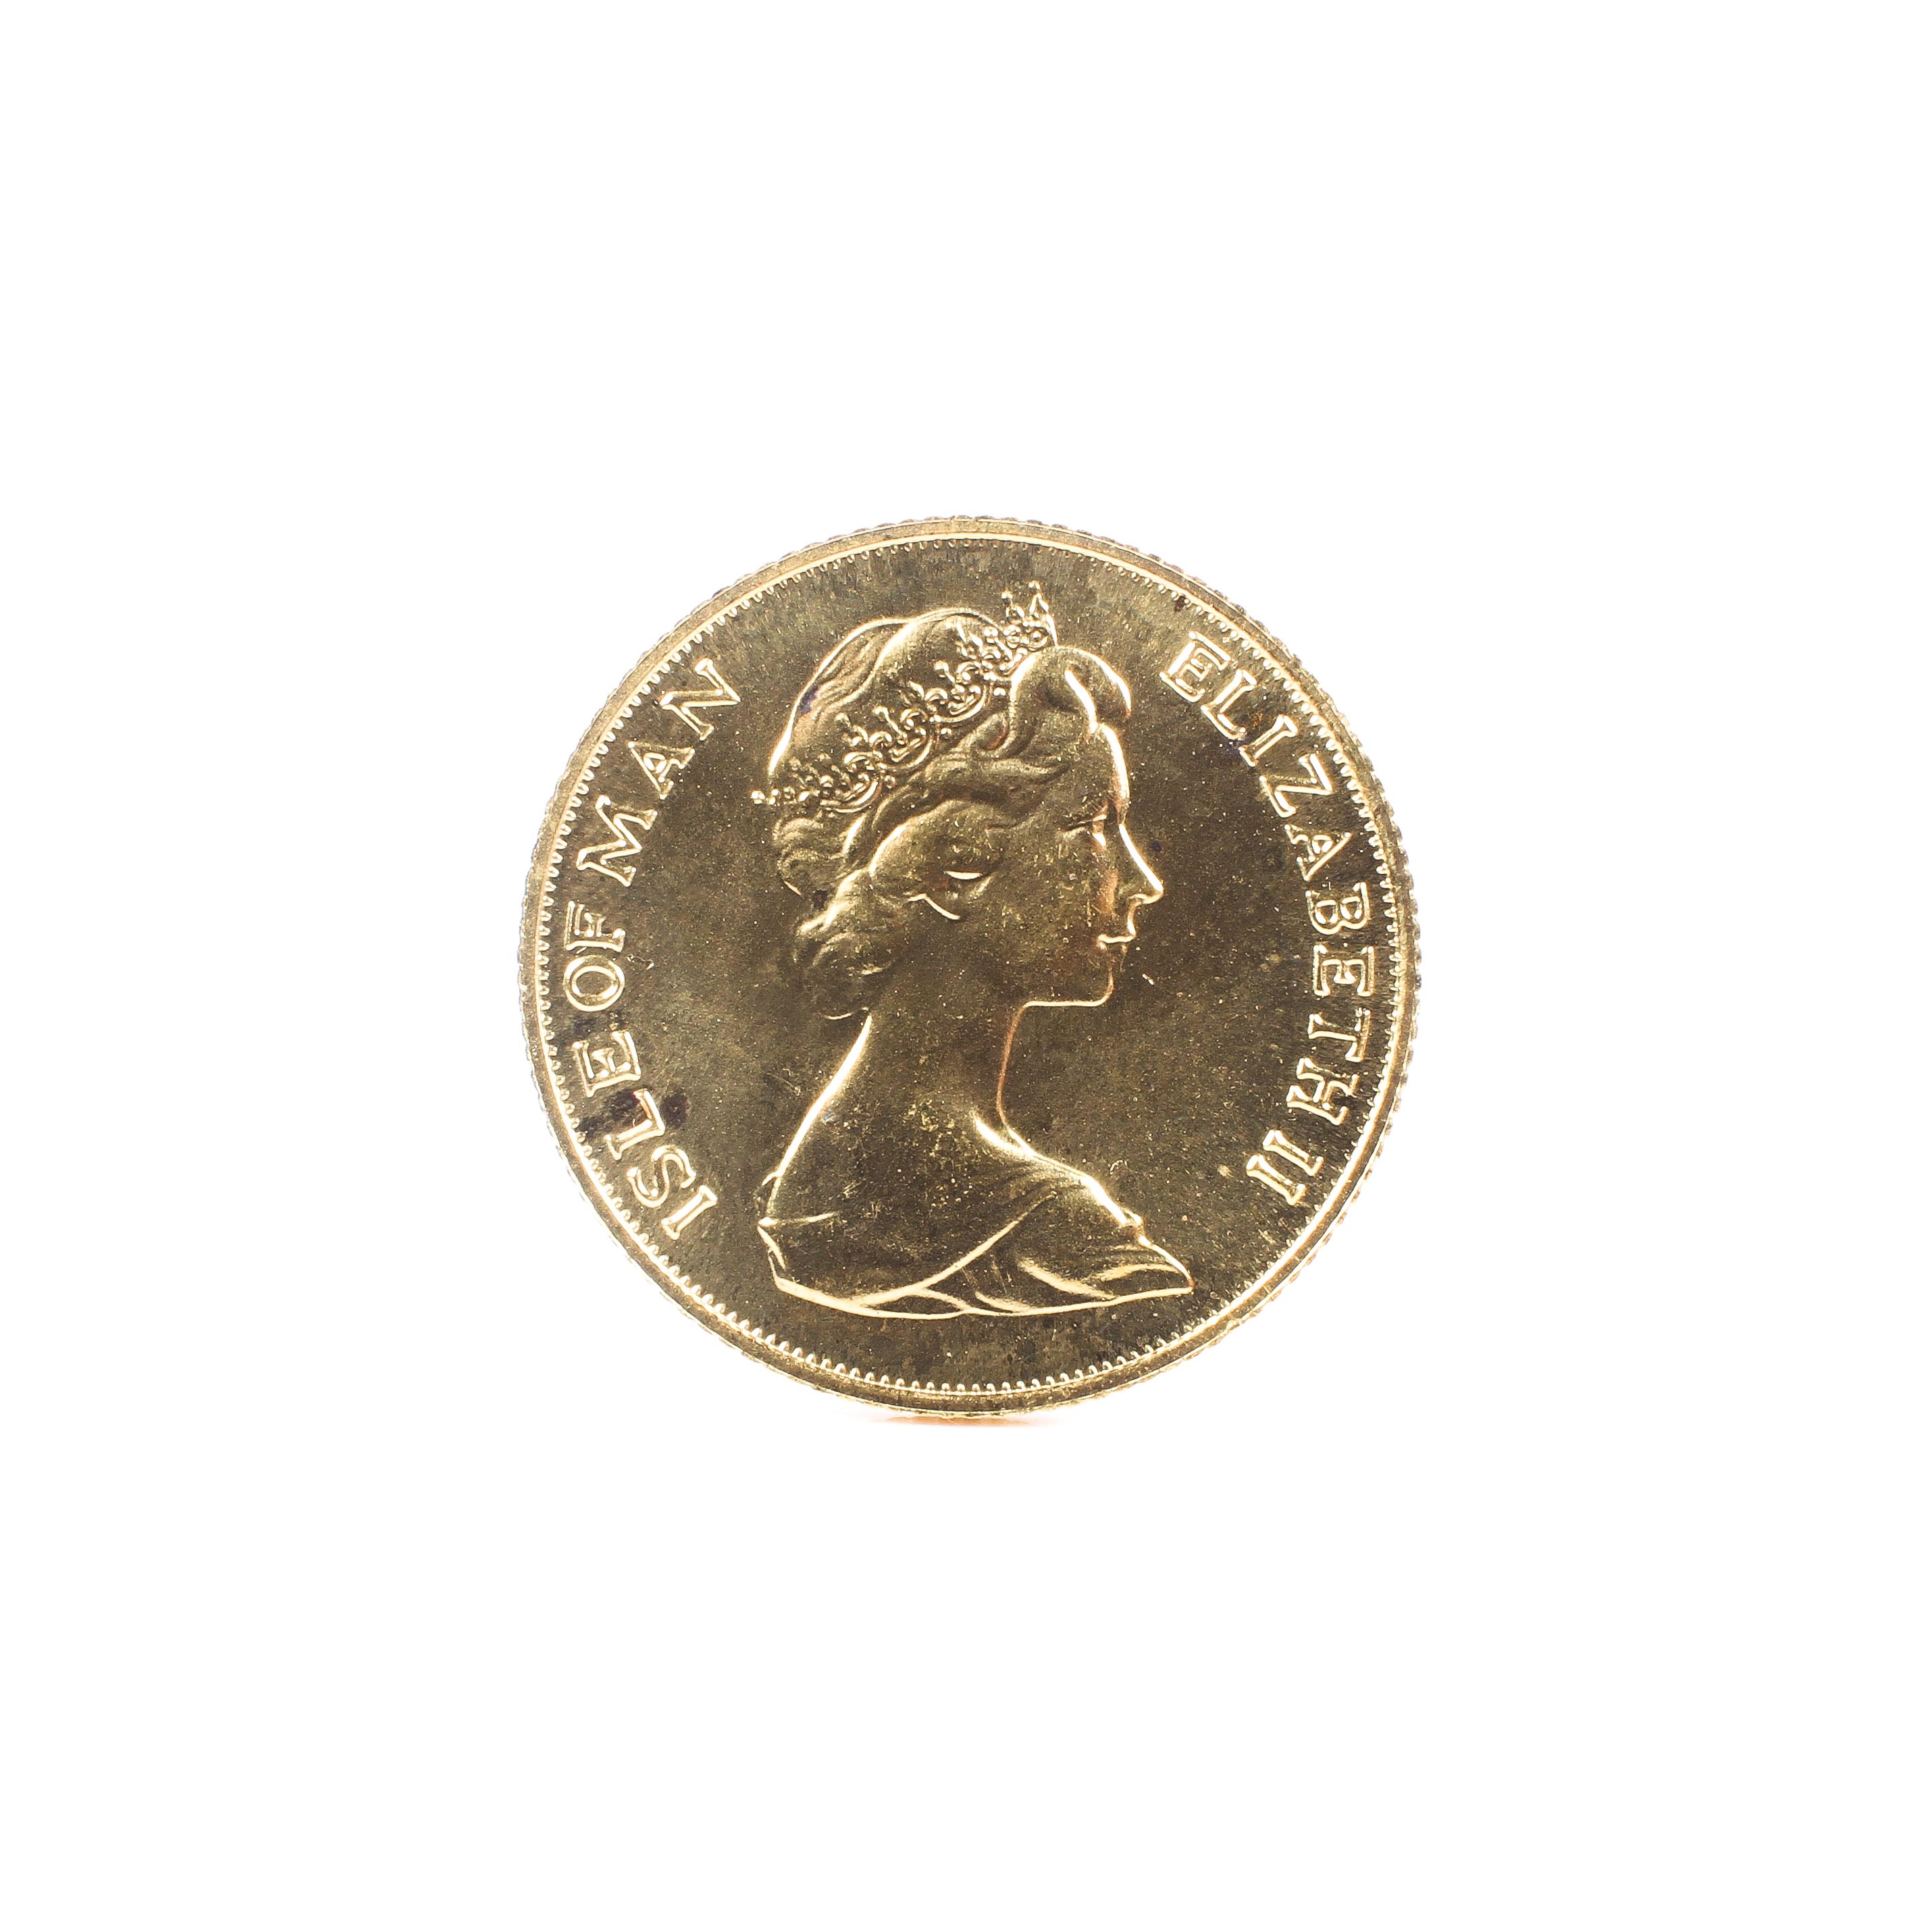 An Isle of man 1973 Gold Sovereign 8.0g.